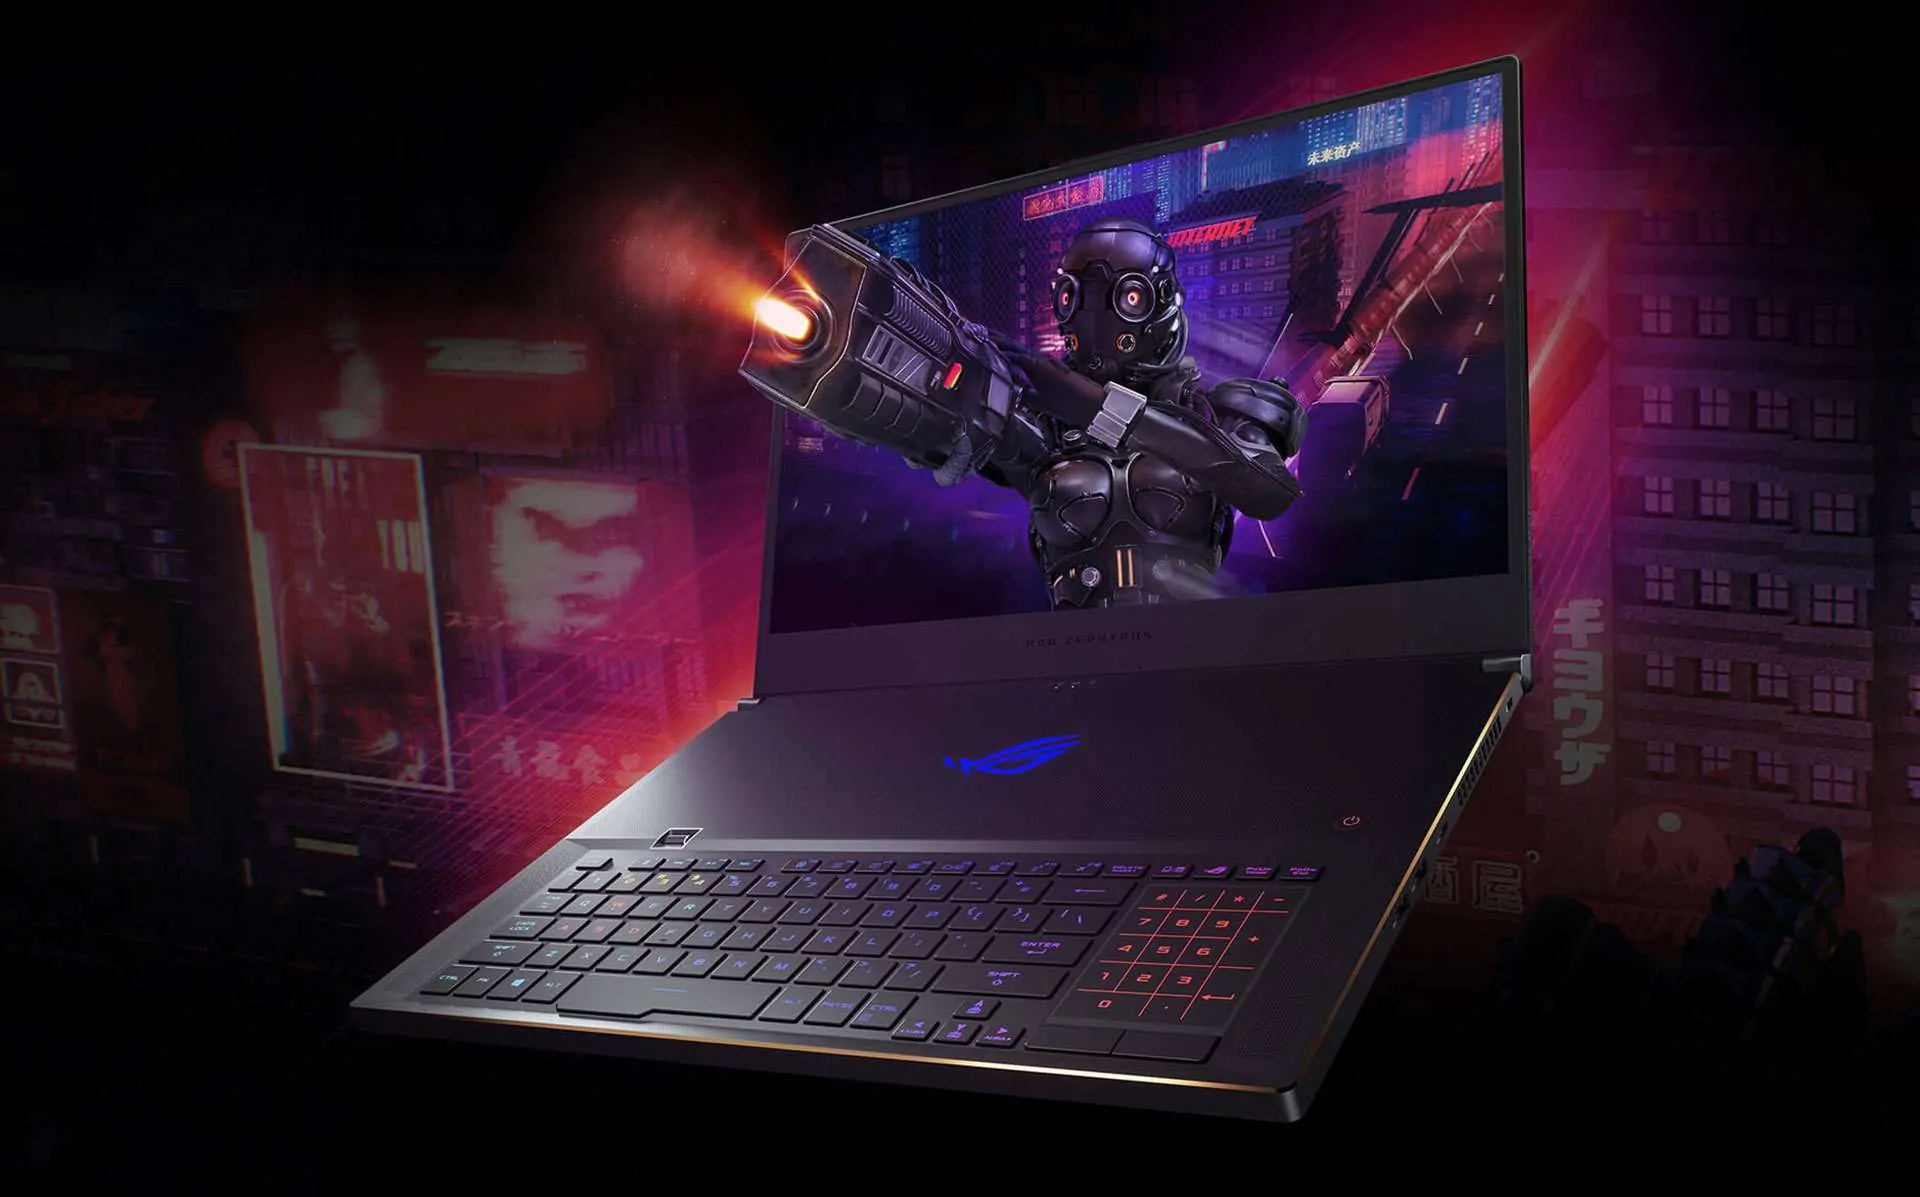 Gaming laptop is dominant with 1080p display, even with high-end laptops